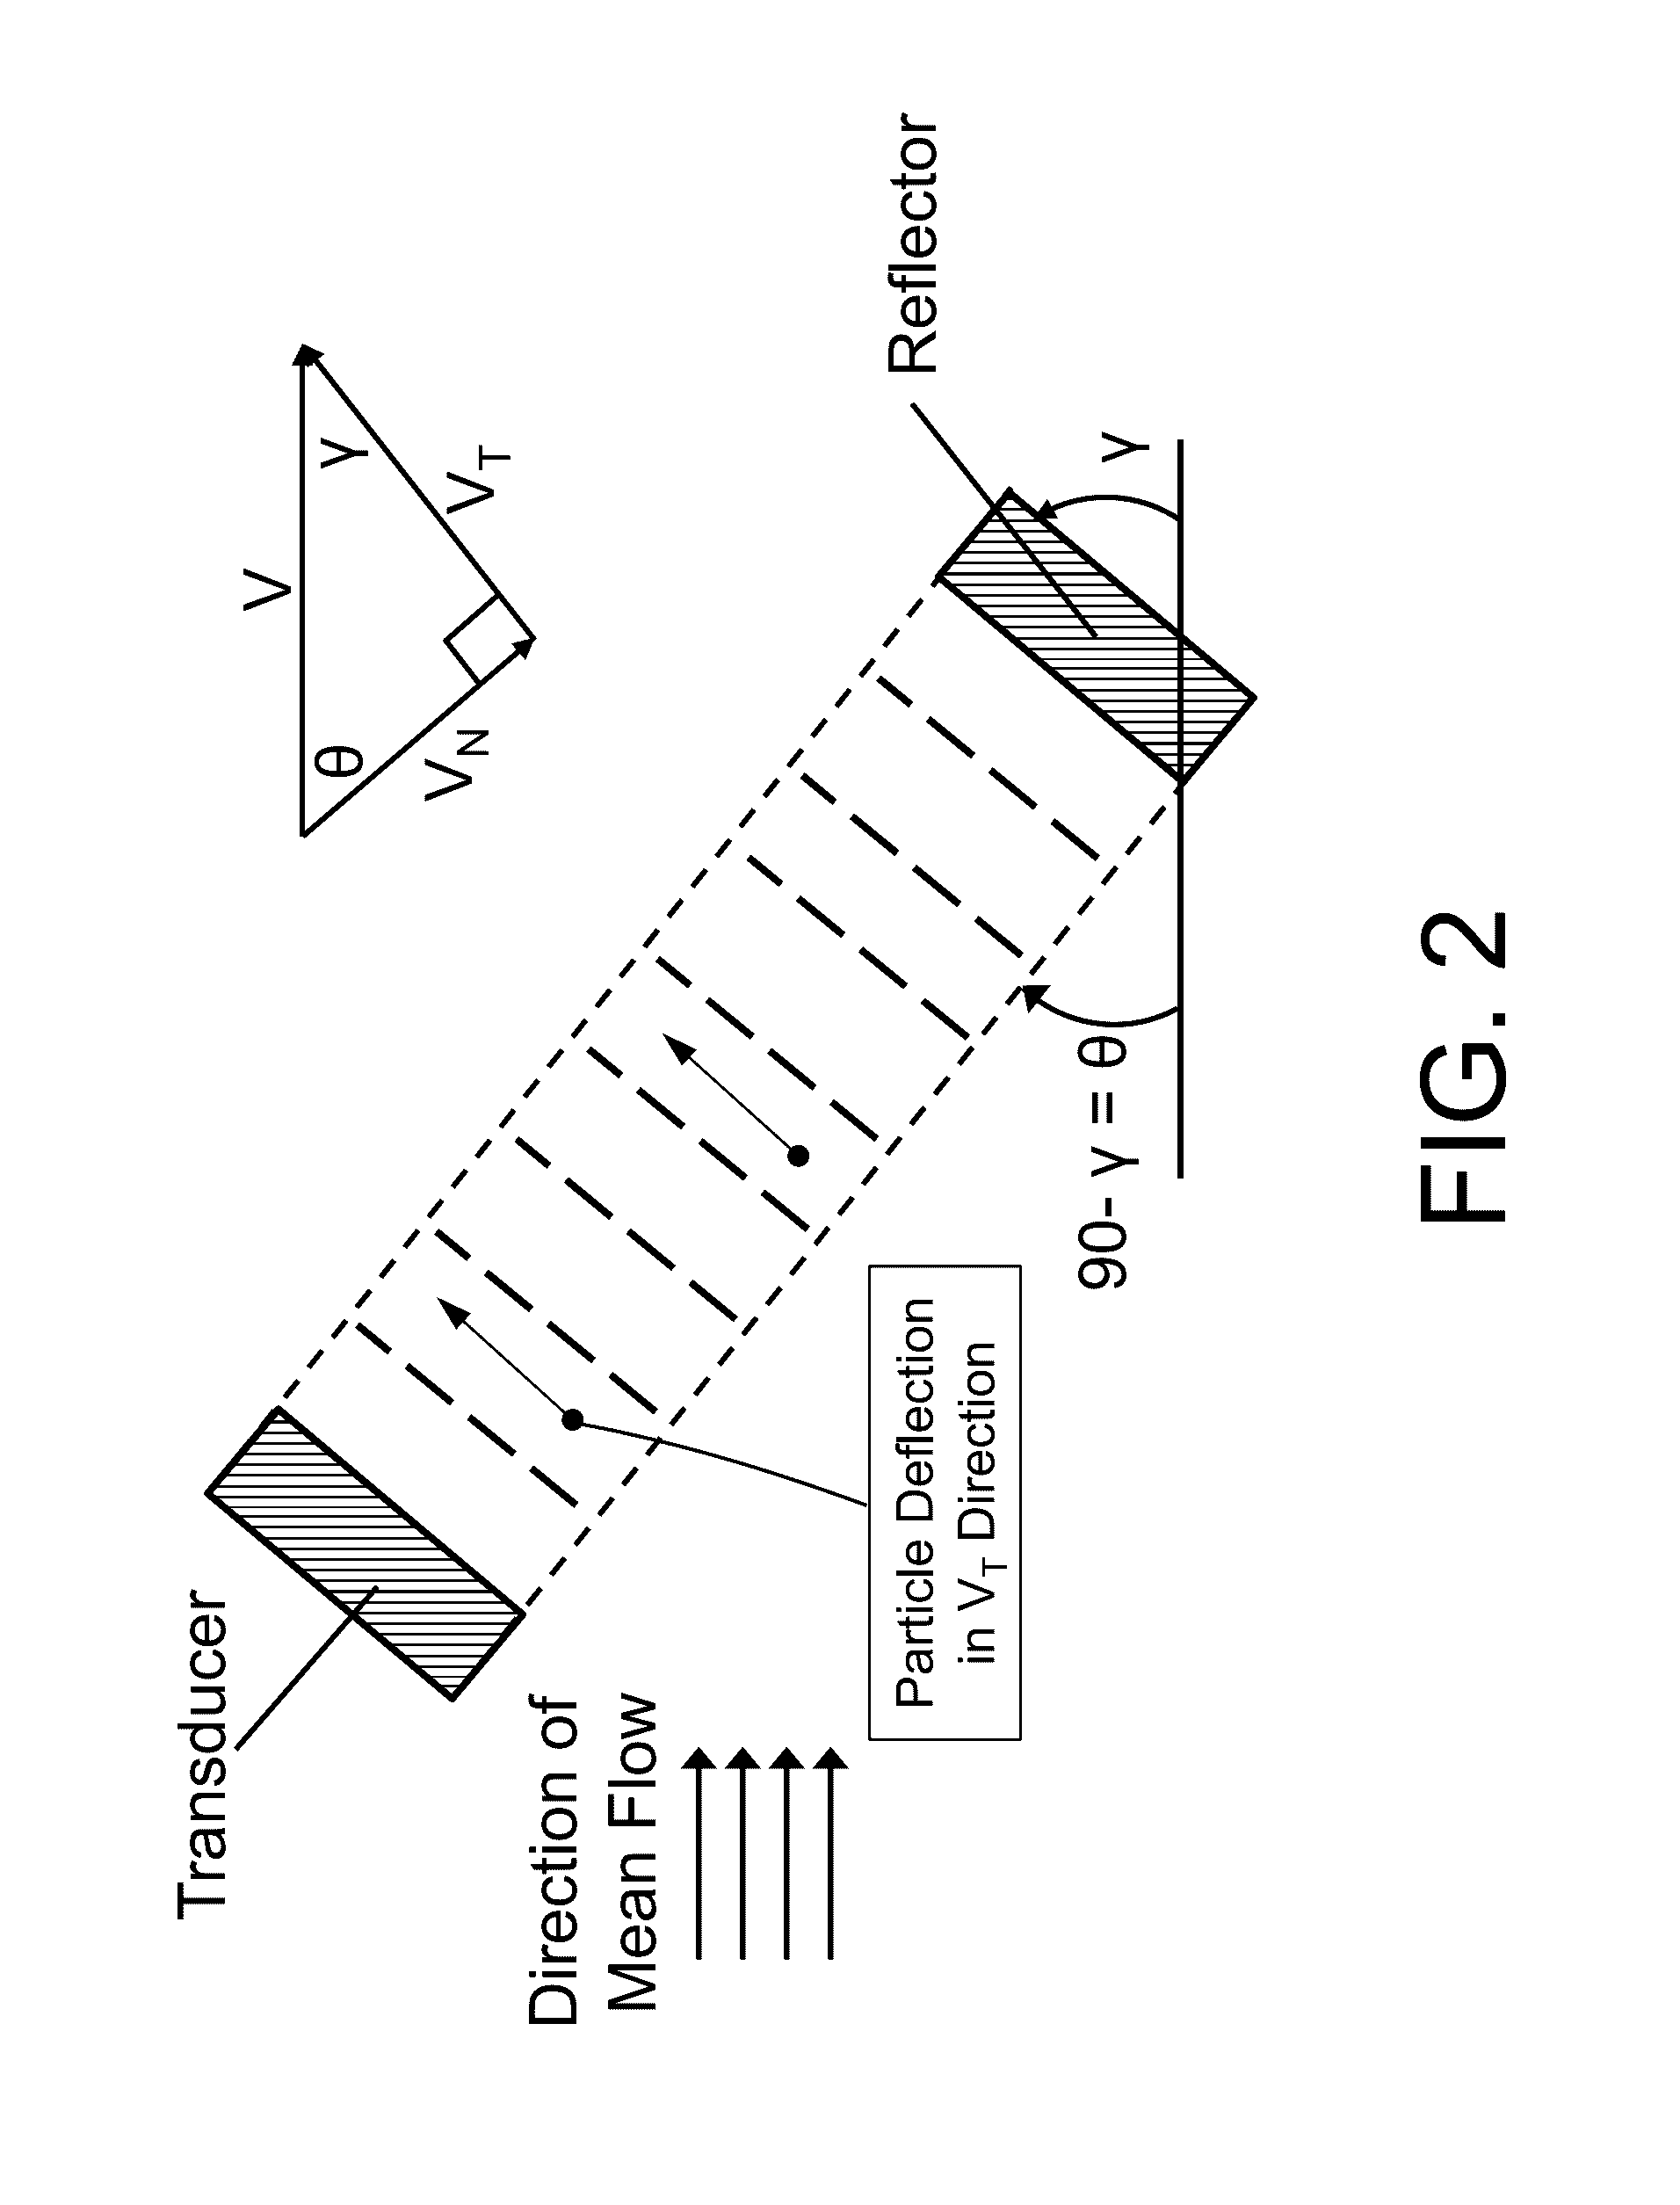 Acoustophoretic device for angled wave particle deflection